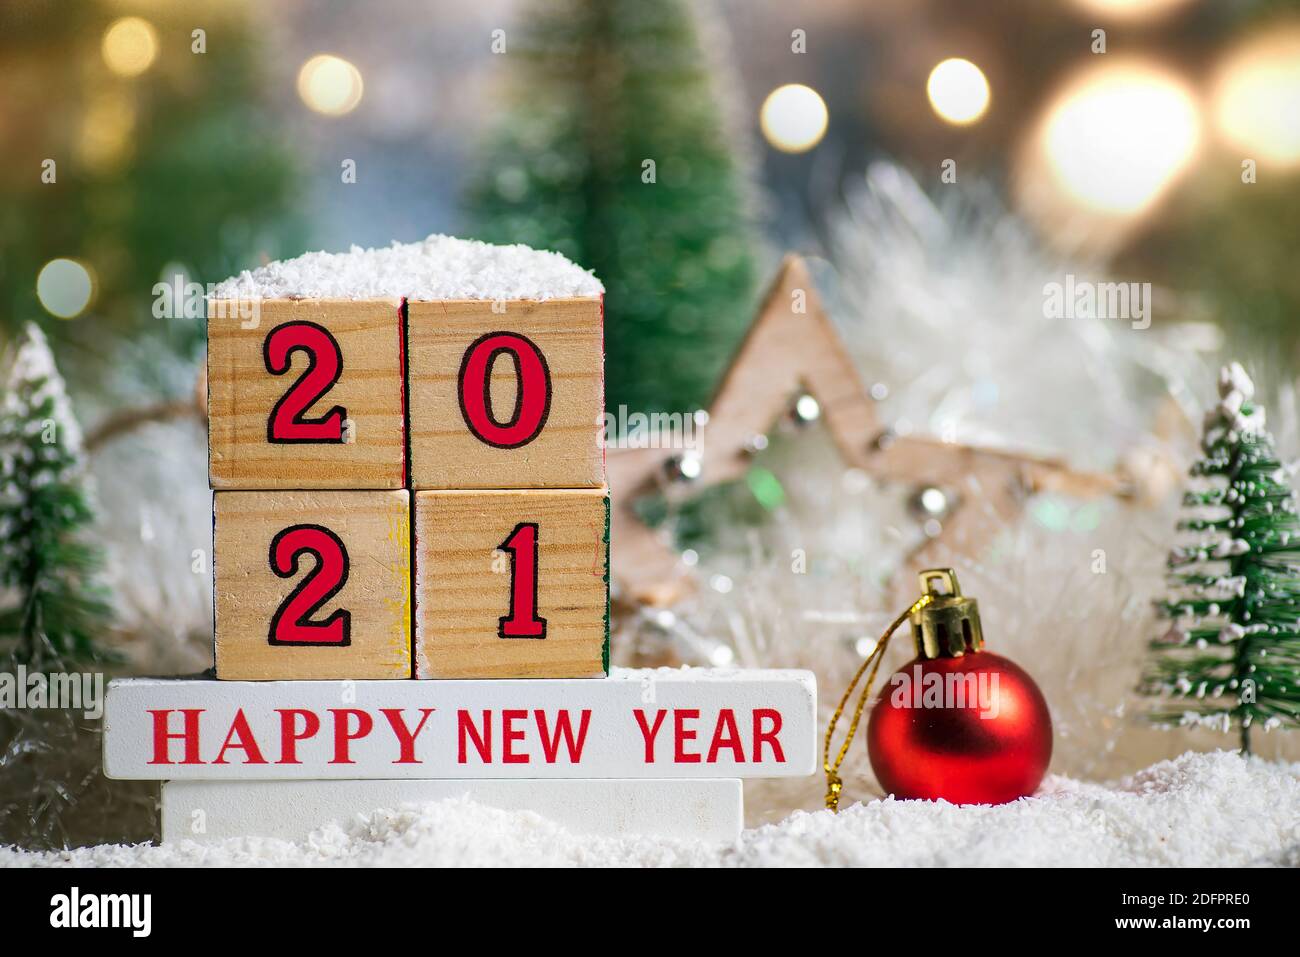 Happy New Year 2021 with Christmas tree winter holiday festive background and ornaments Stock Photo